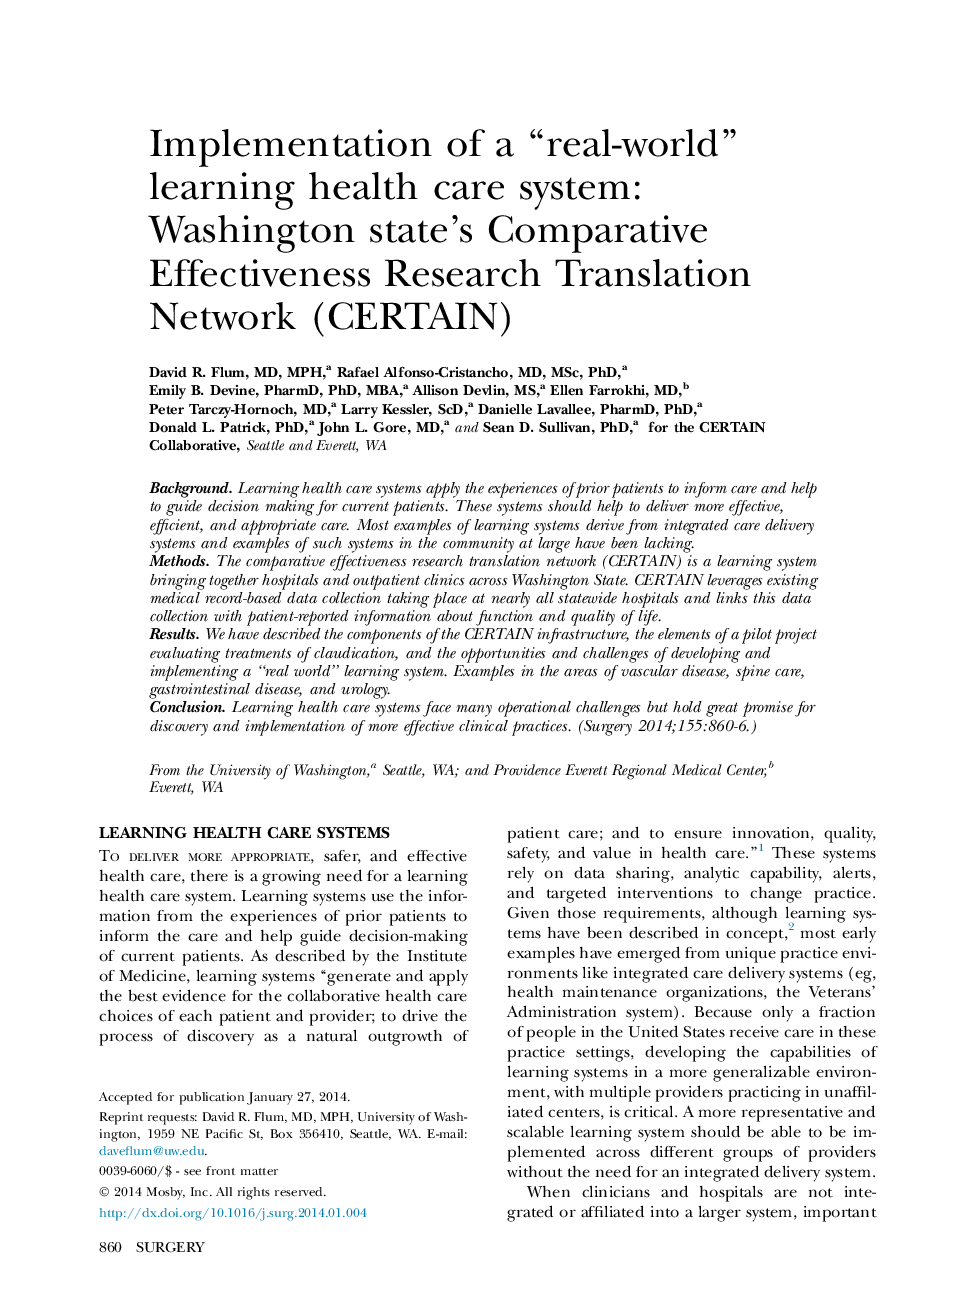 Implementation of a “real-world” learning health care system: Washington state's Comparative Effectiveness Research Translation Network (CERTAIN)